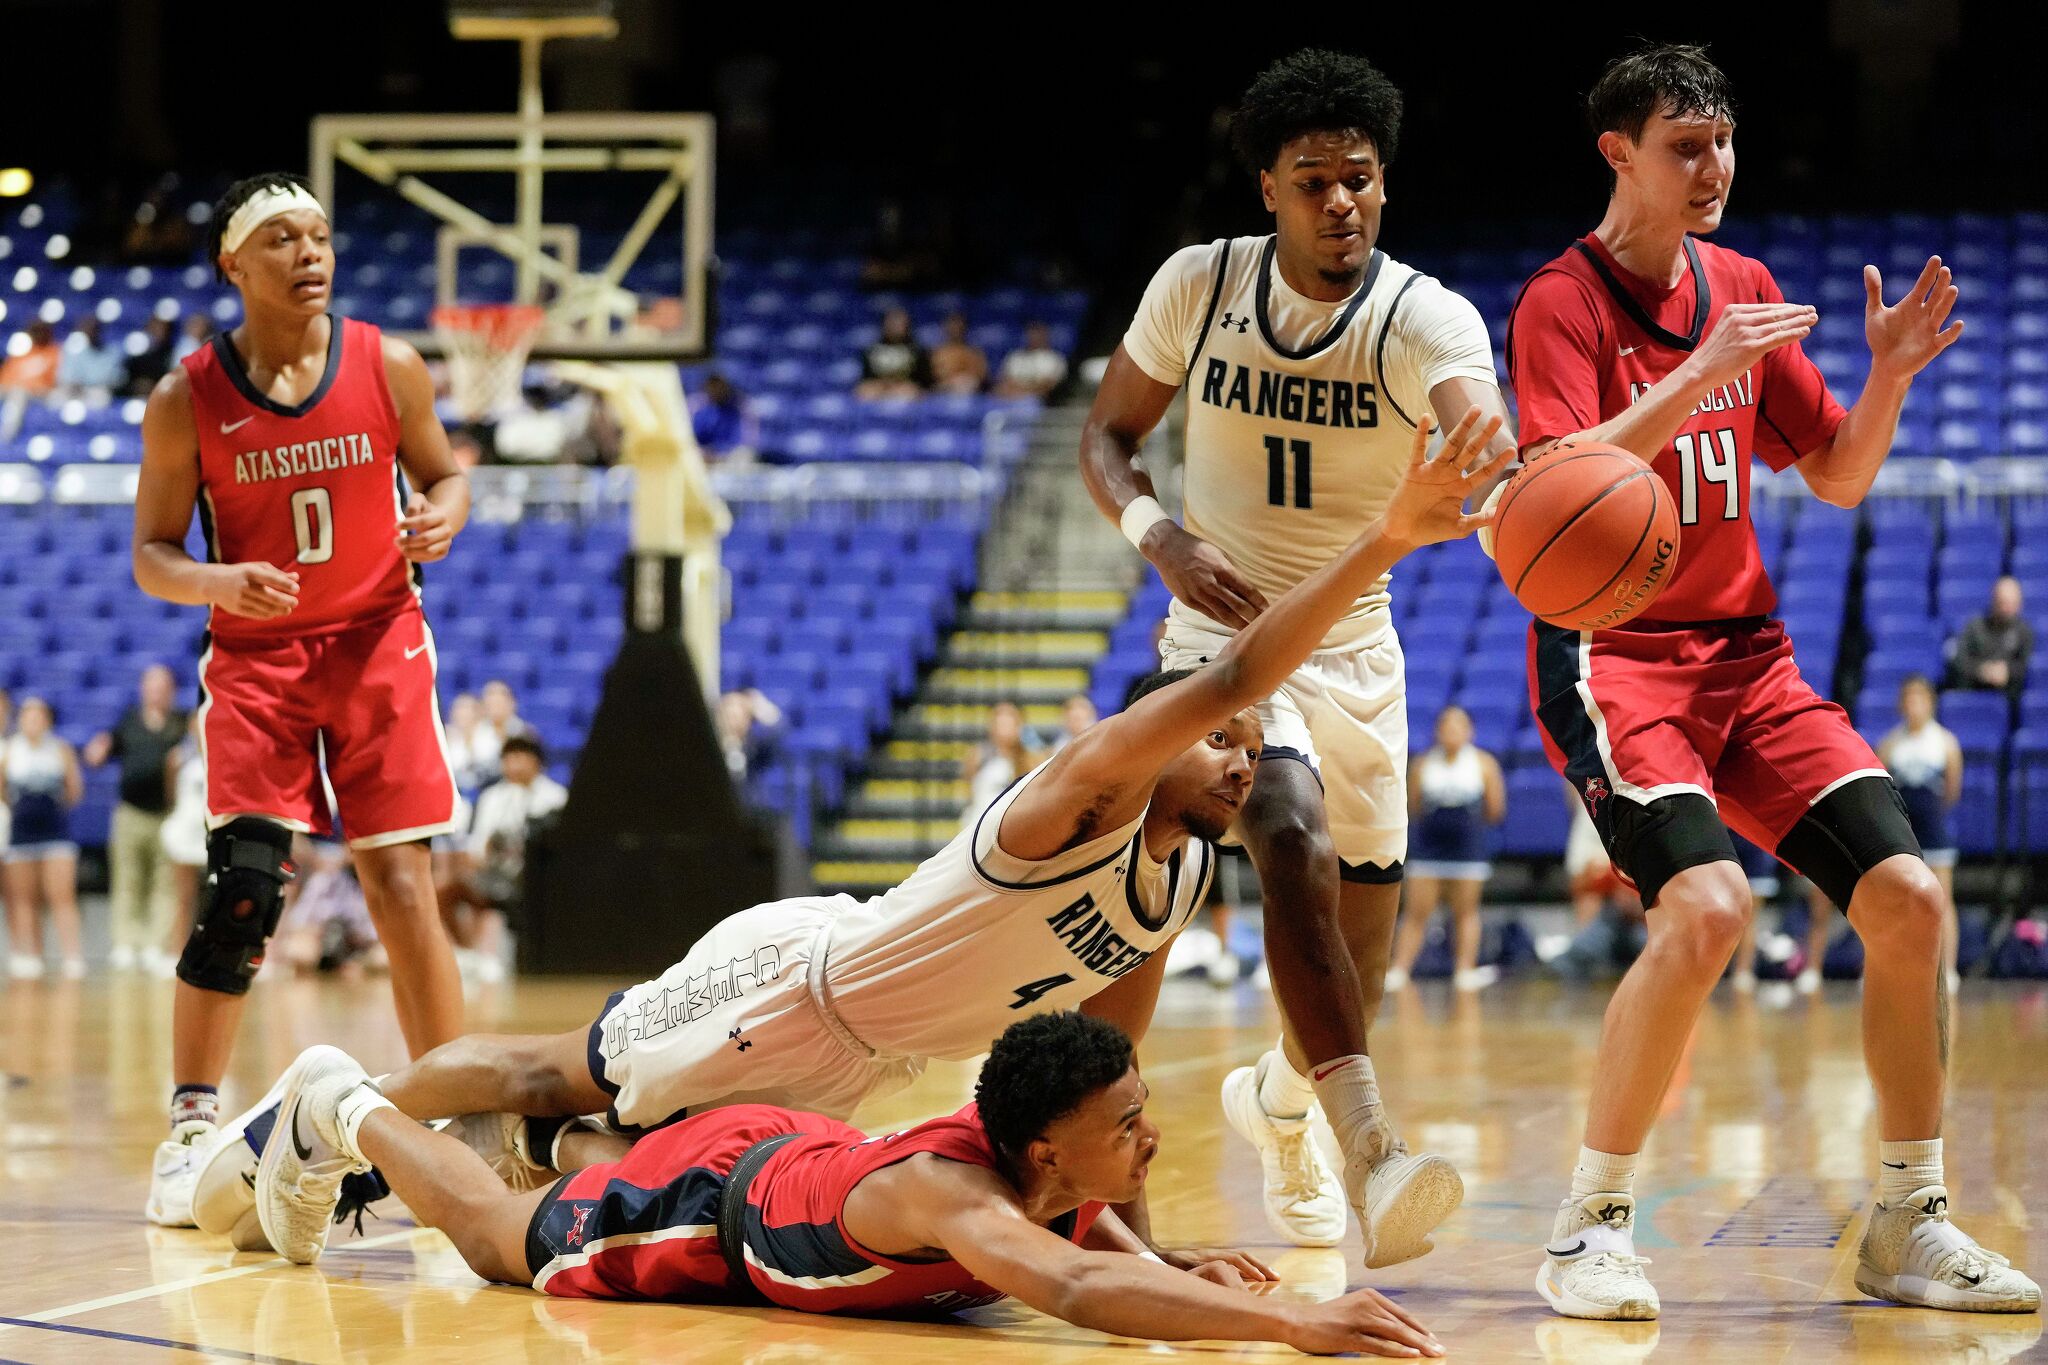 Boys basketball UIL state tournament schedule